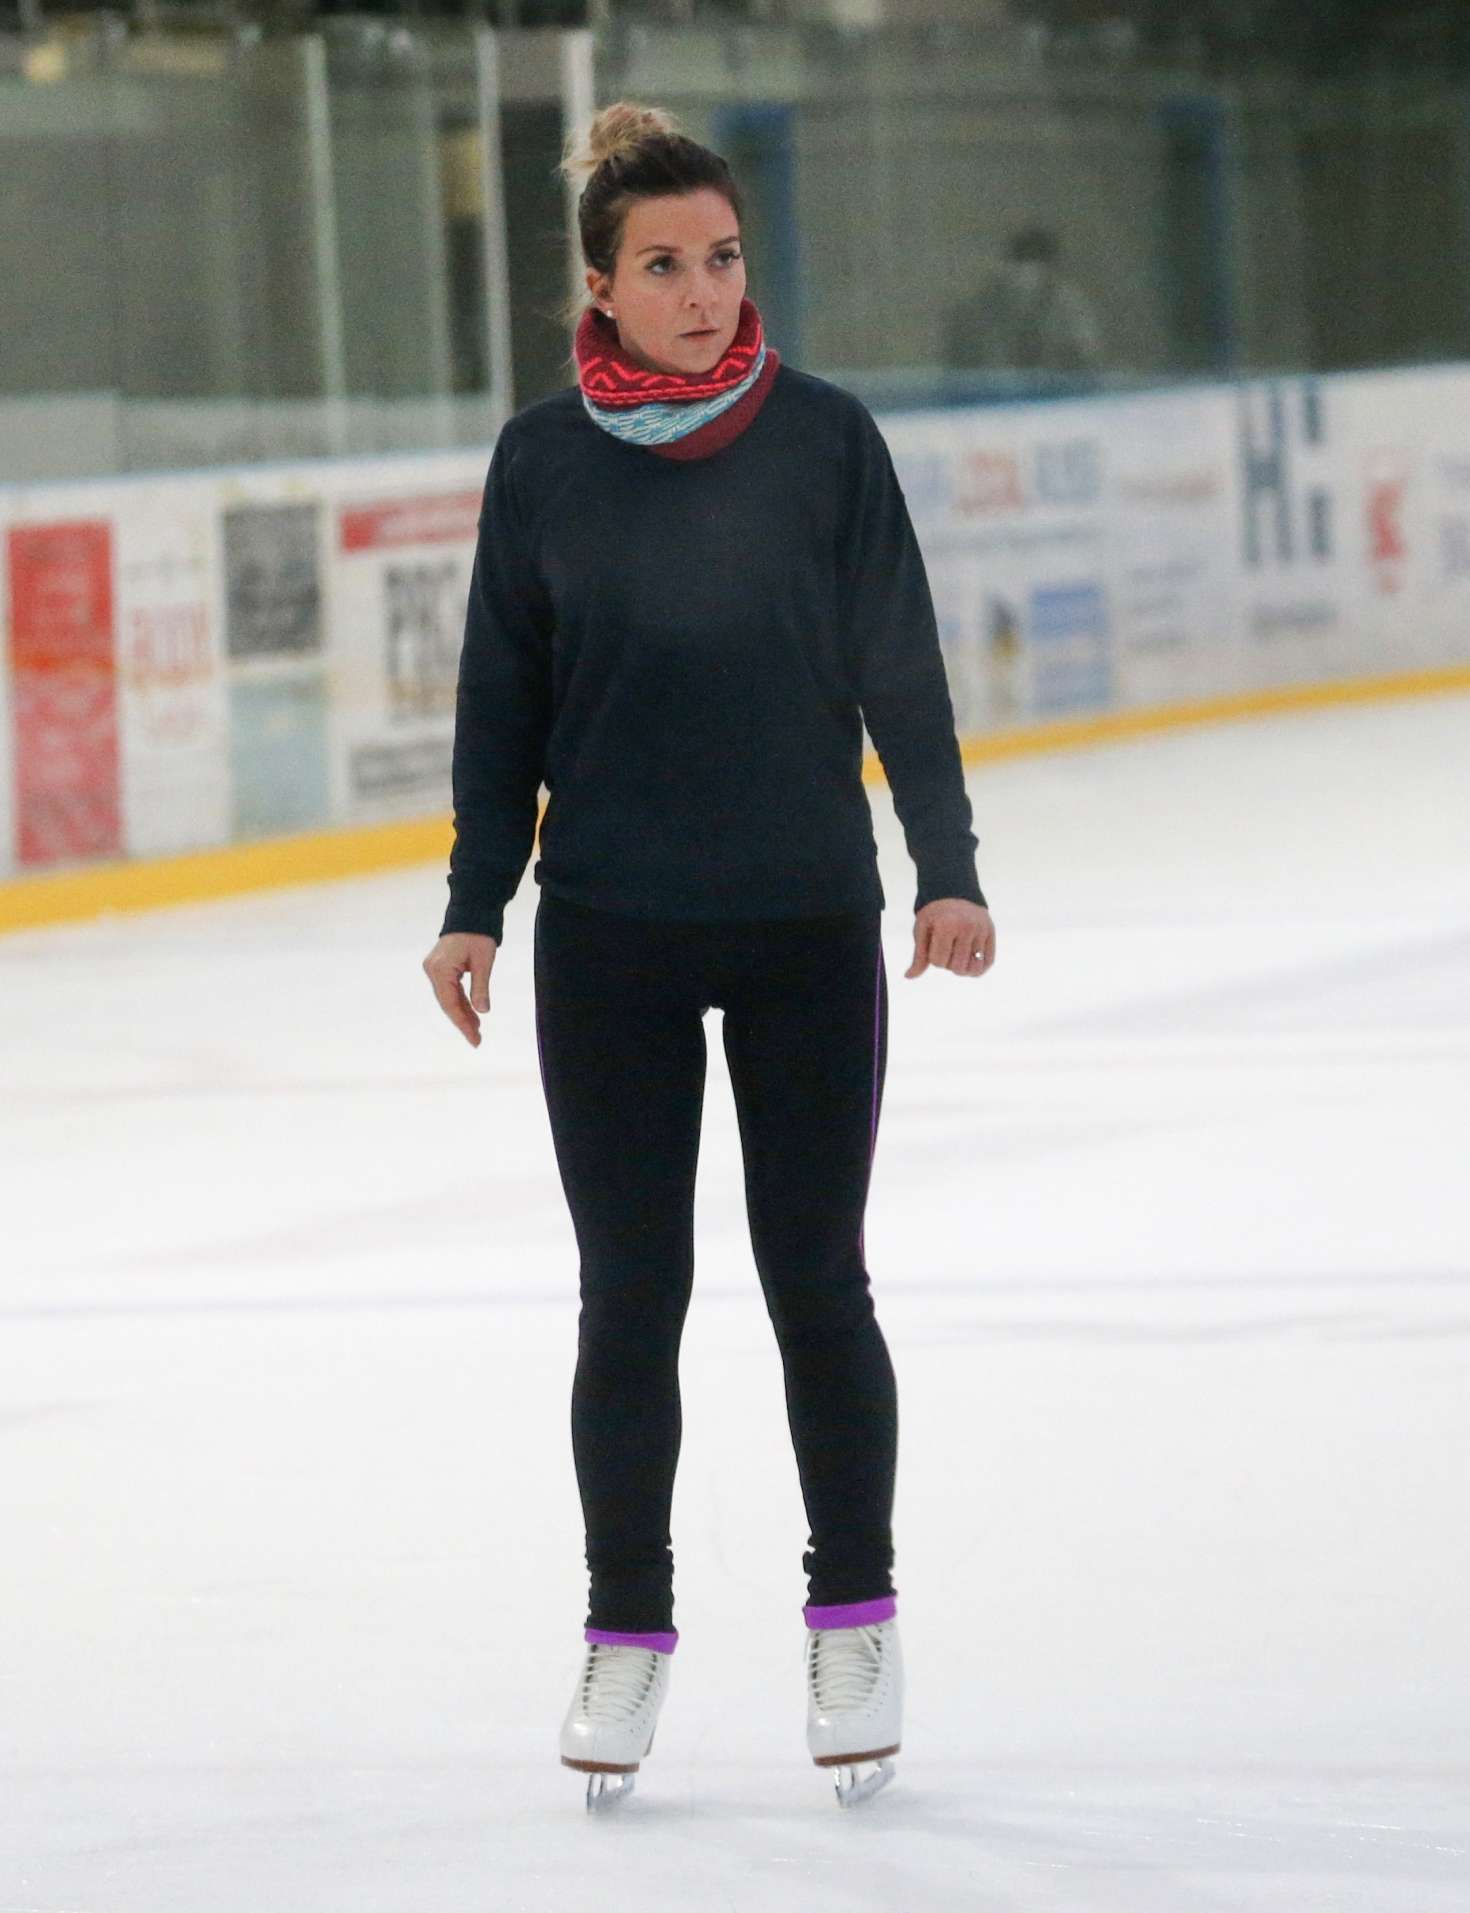 Candice Brown on the ice for 'Dancing On Ice' rehearsals in Essex